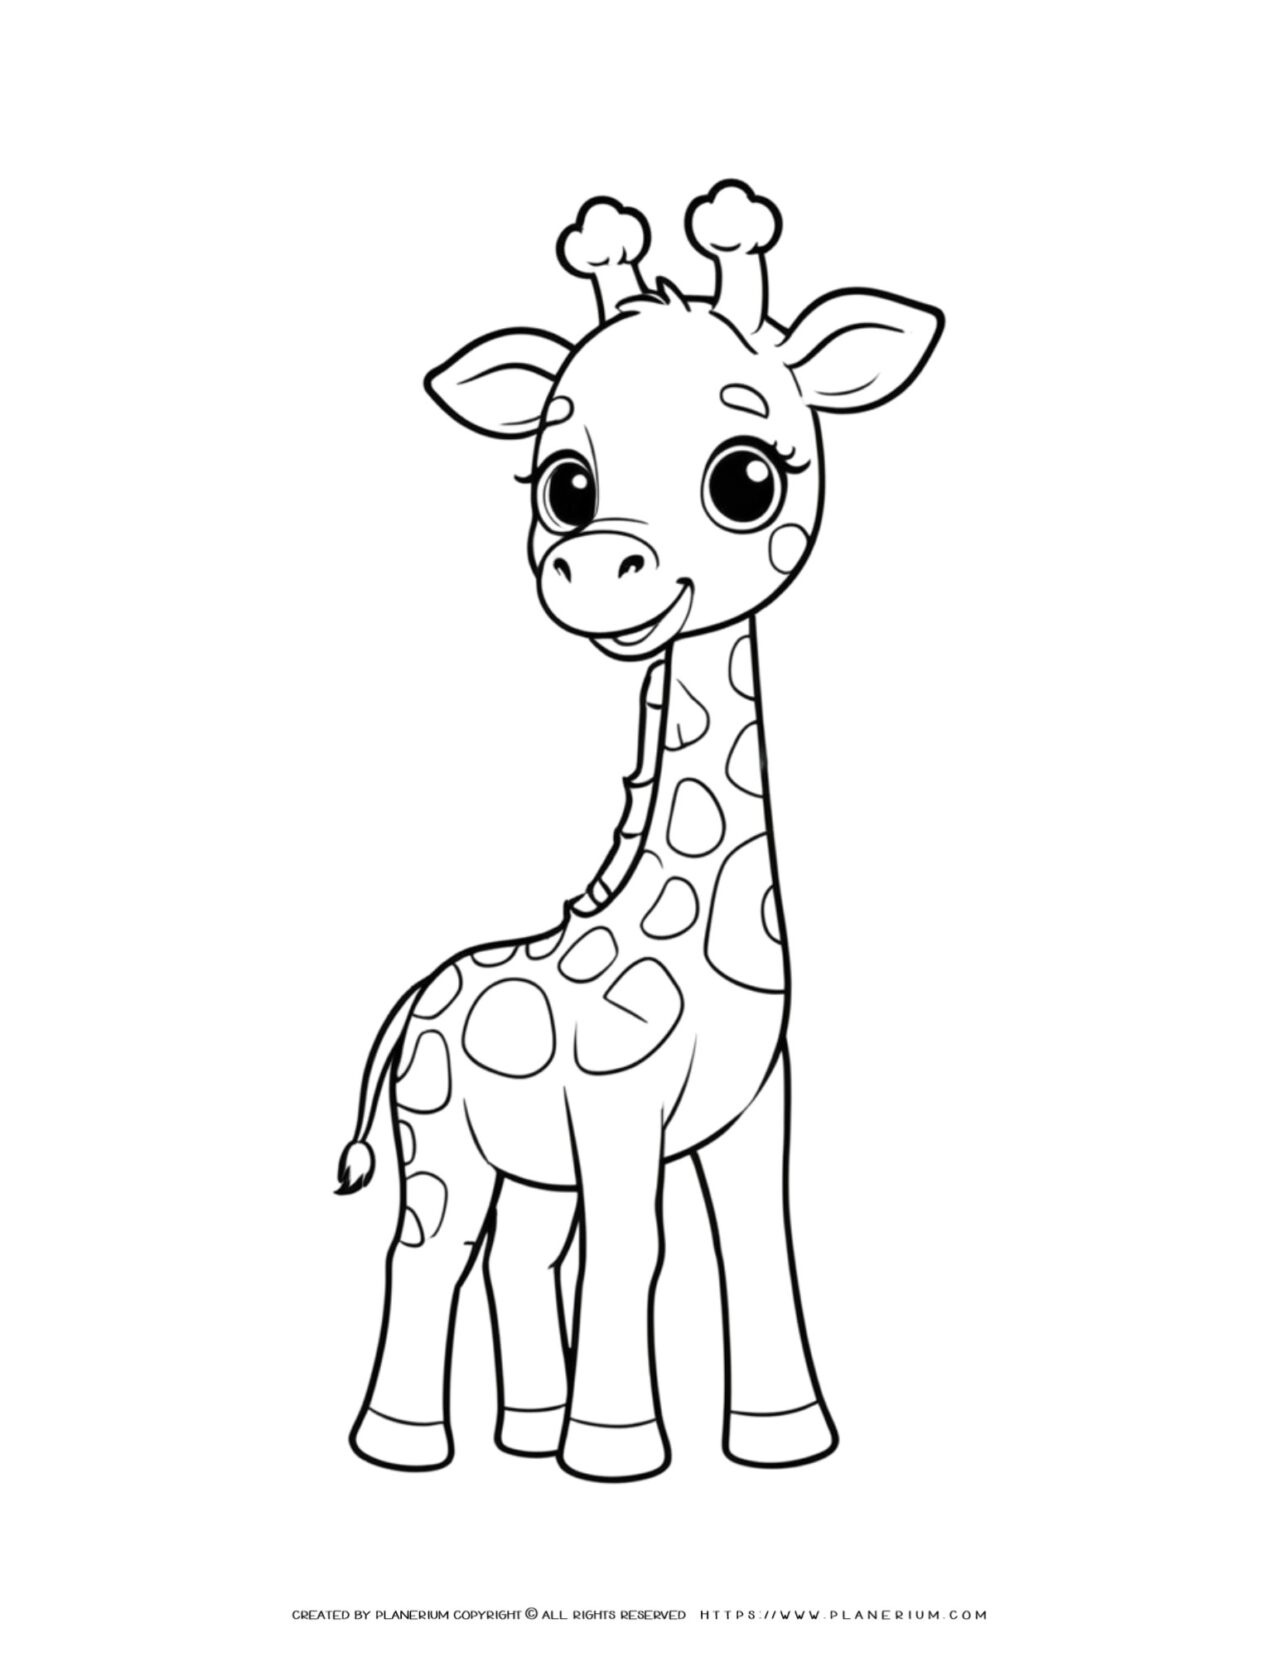 cute-baby-outline-giraffe-coloring-page-for-kids